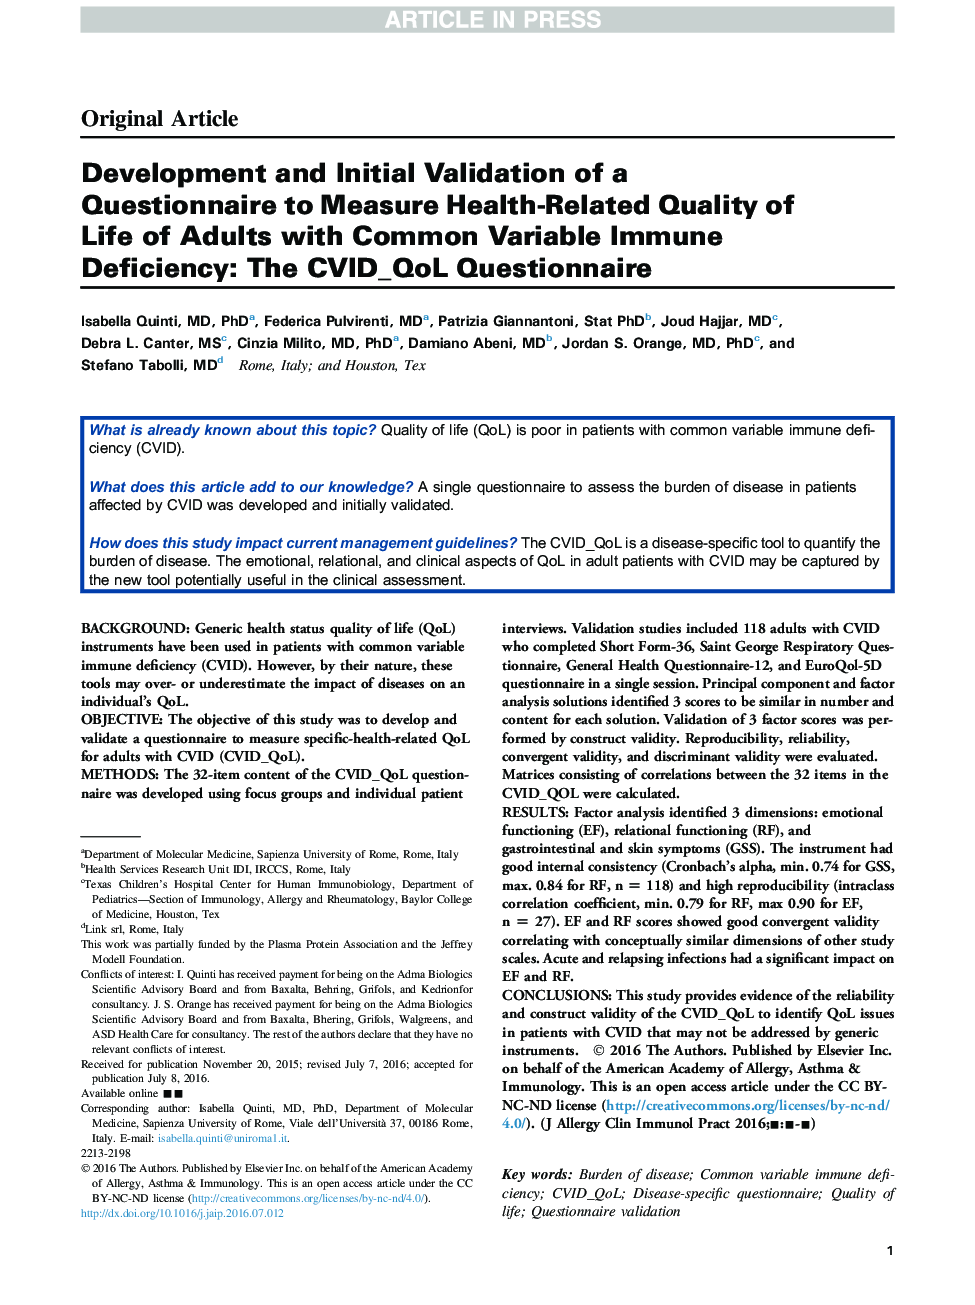 Development and Initial Validation of a Questionnaire to Measure Health-Related Quality of Life of Adults with Common Variable Immune Deficiency: The CVID_QoL Questionnaire